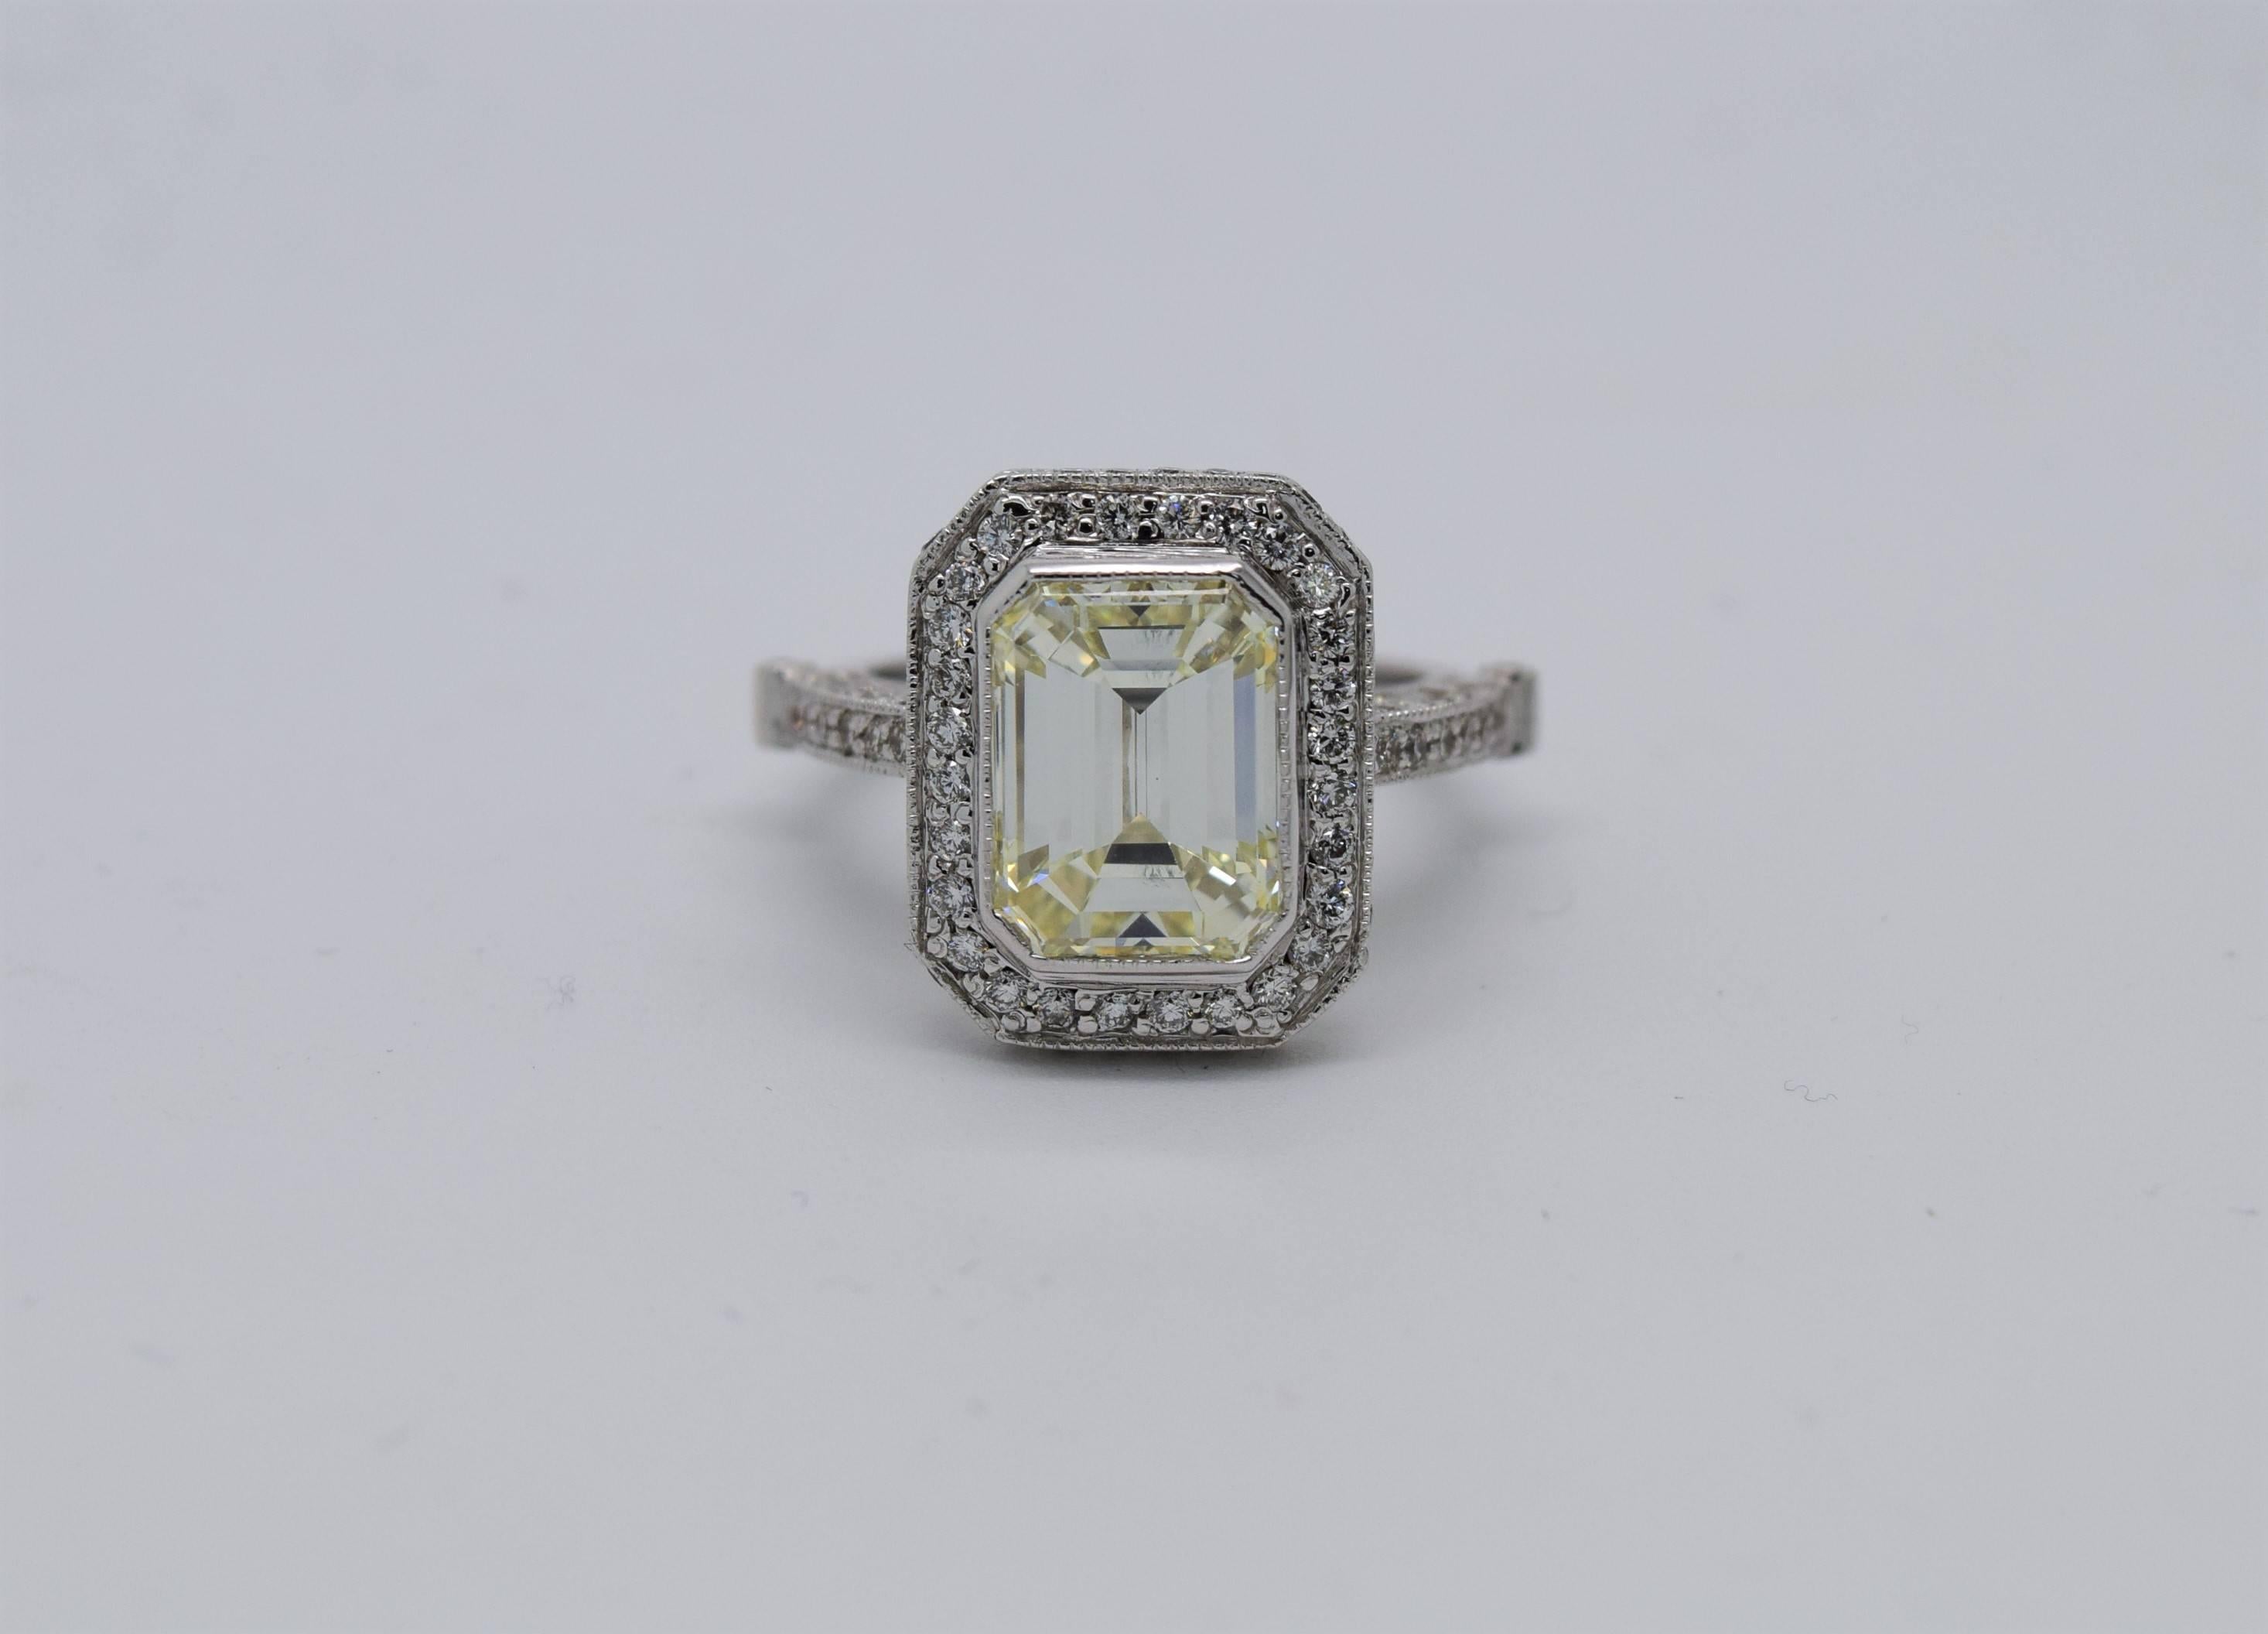 5 carat Emerald Cut diamond cocktail ring set in a custom made 18k white gold ring with side diamonds.

Center diamond weighs 5.06ct and is approximately L-M in color and VS1 clarity.
The ring also has side diamonds set all around and under the